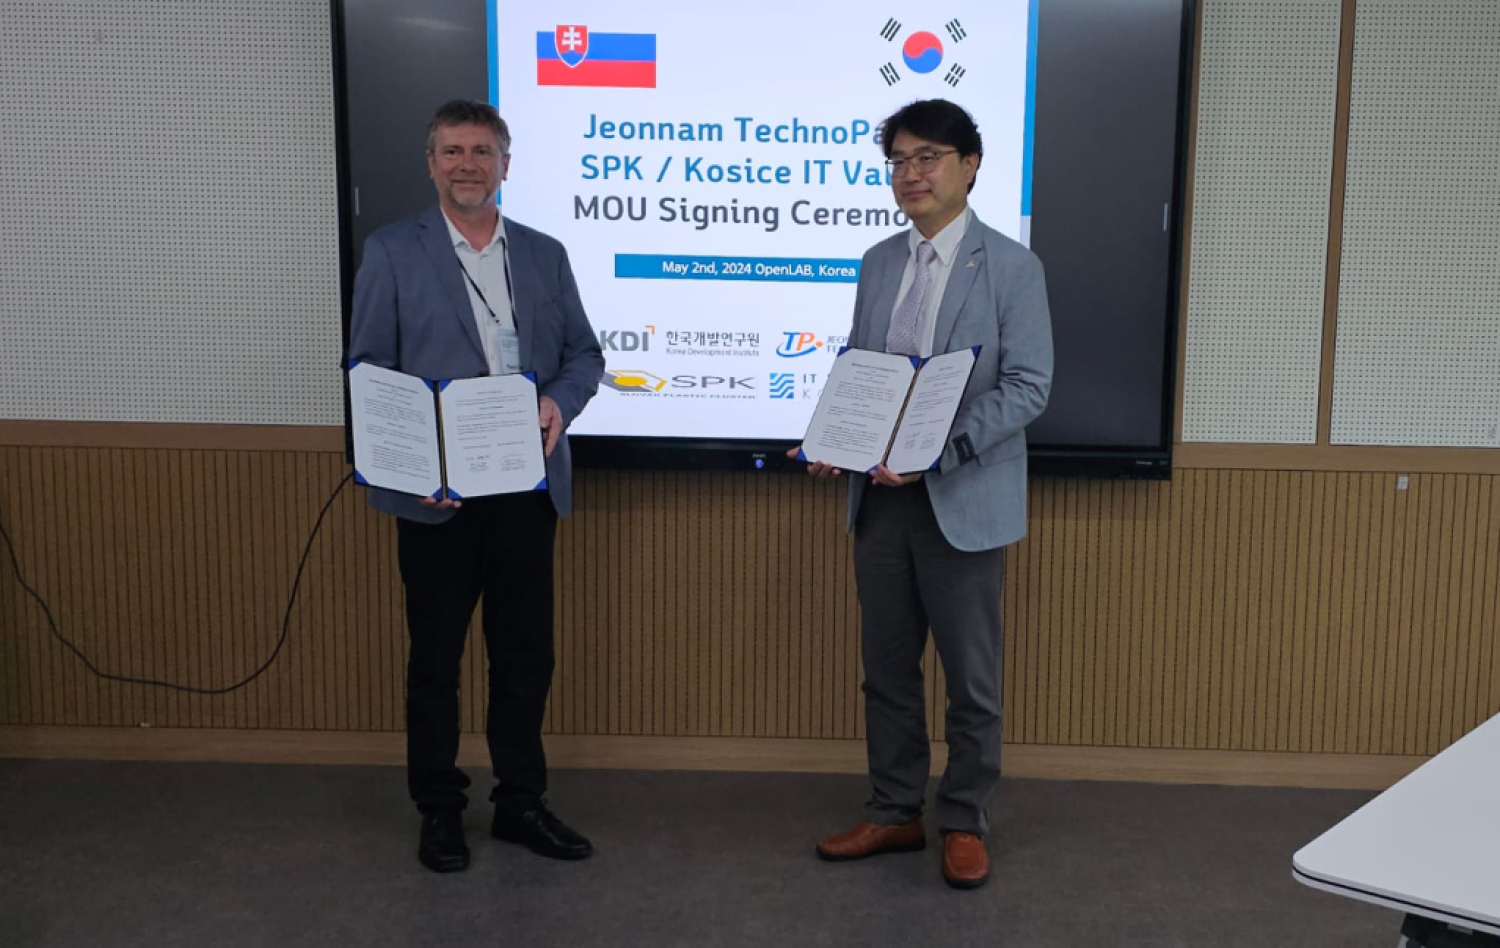 SPK representatives in Korea: New opportunities and inspirations